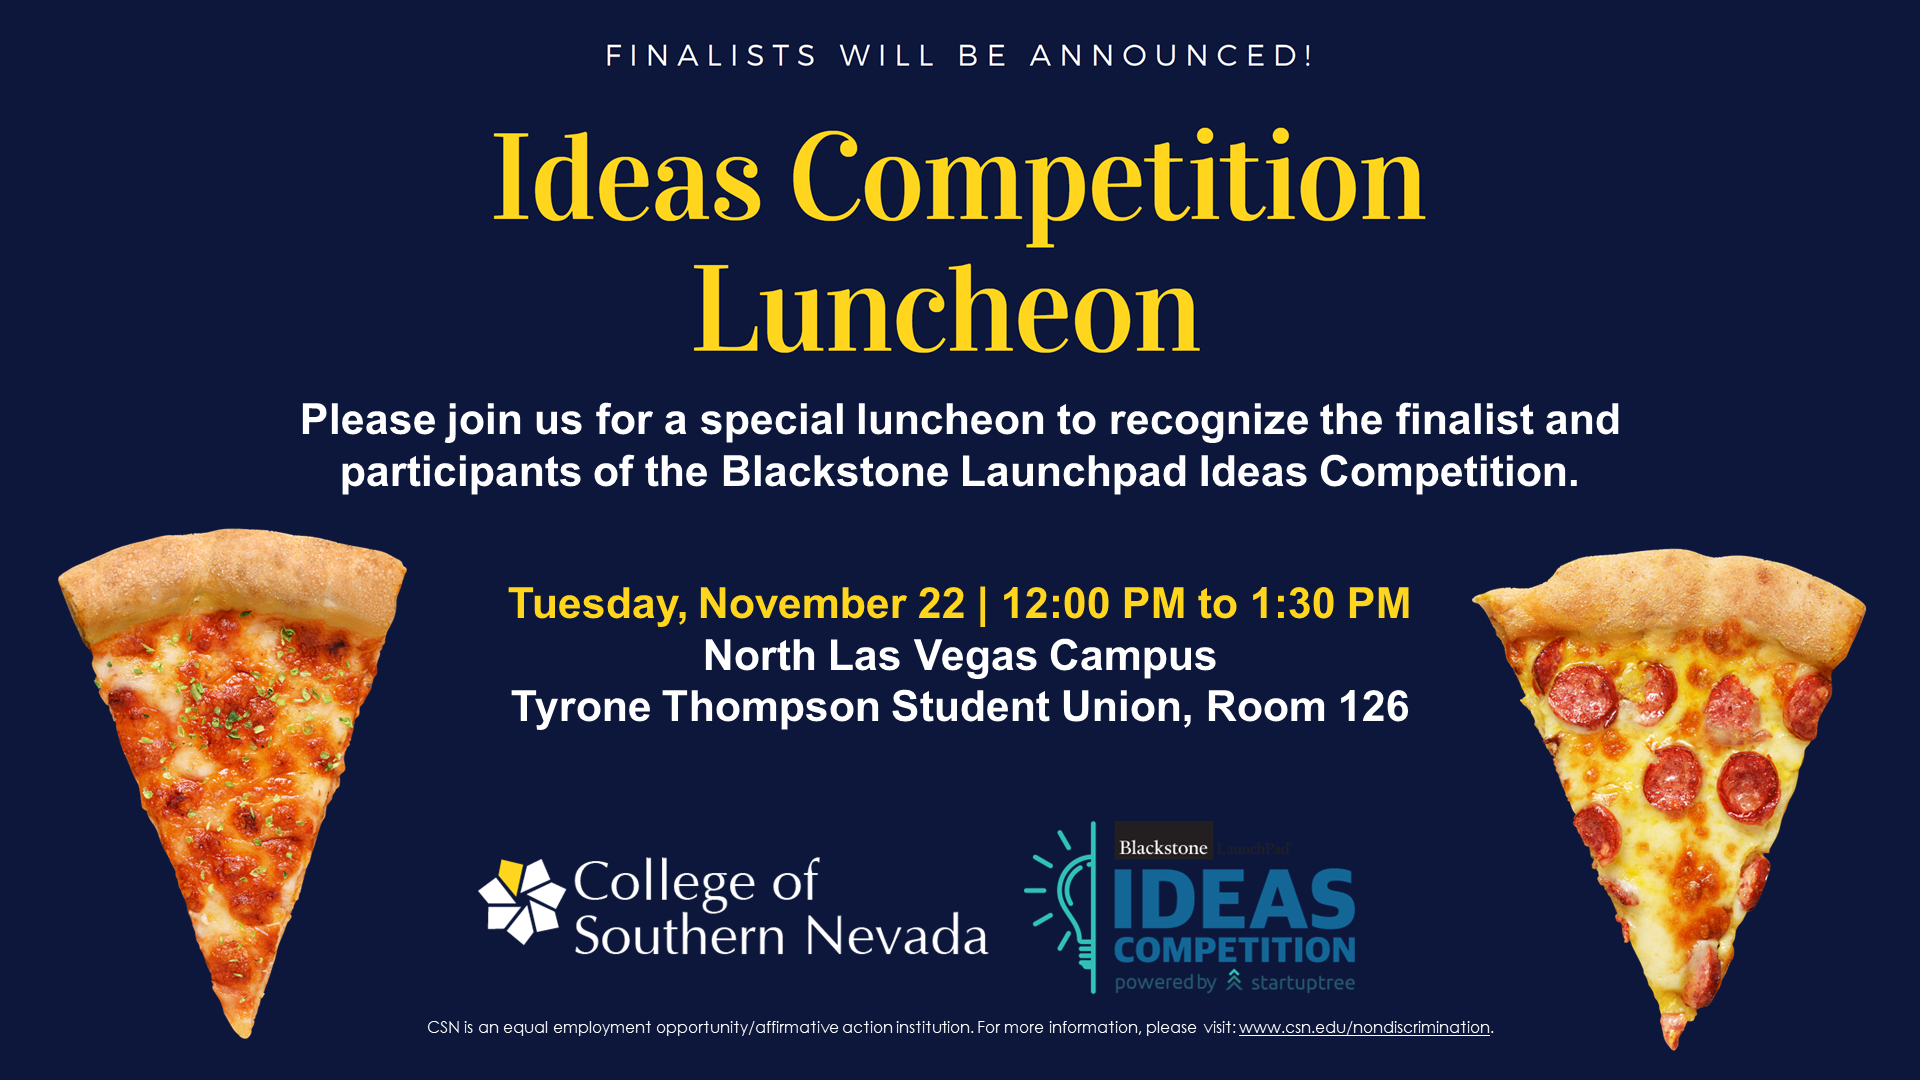 Ideas Competition Luncheon